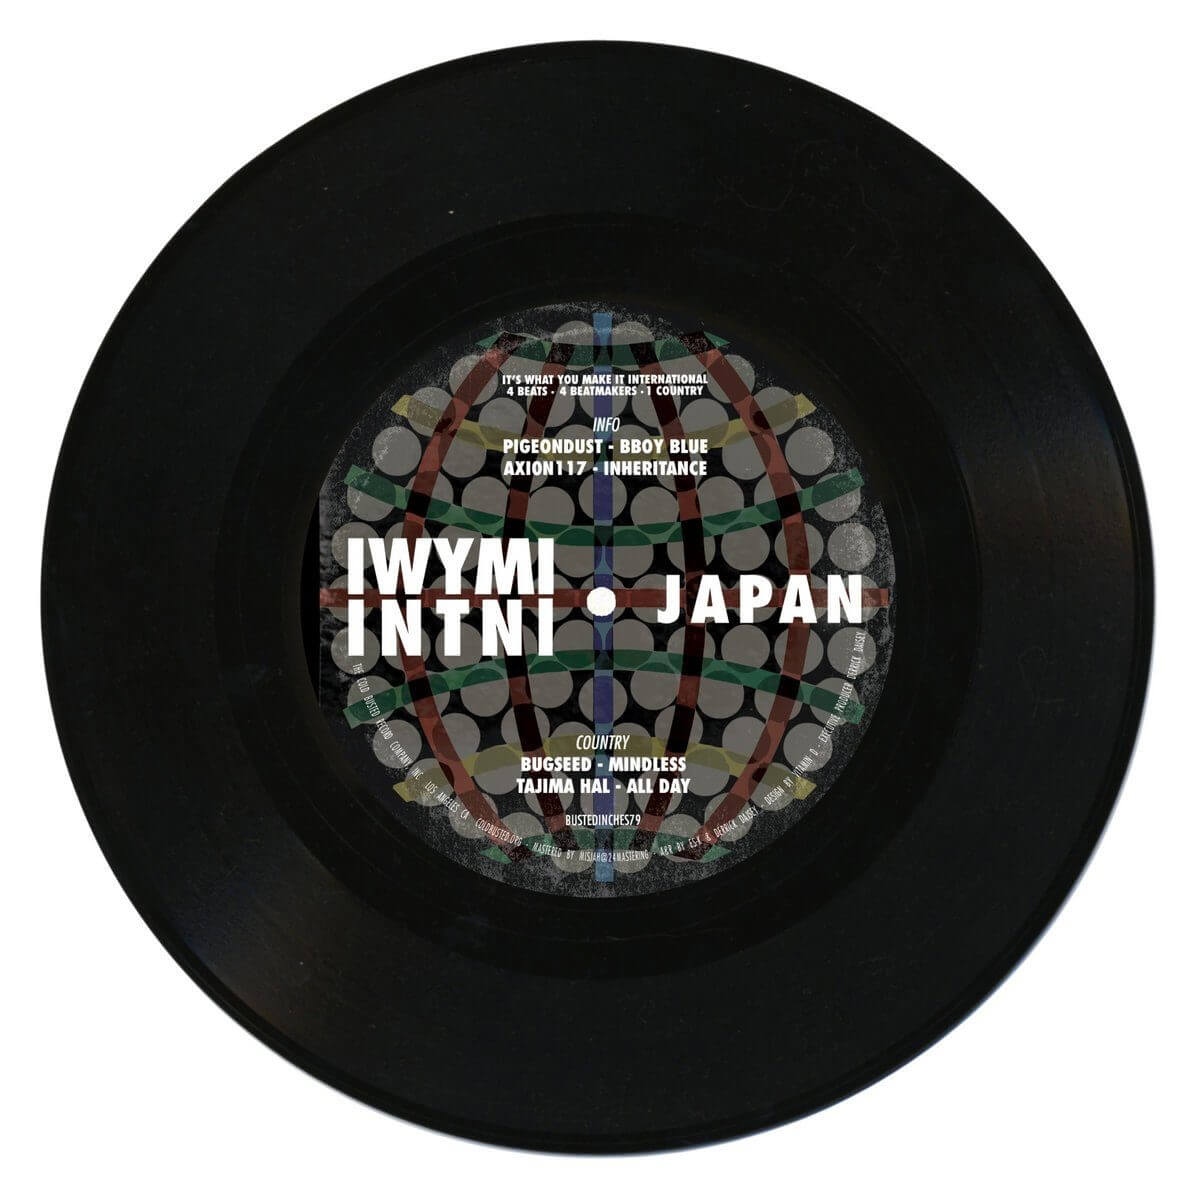 Various Artists - IWYMI INTNl: Japan - Limited Edition 7 Inch Vinyl - Cold Busted